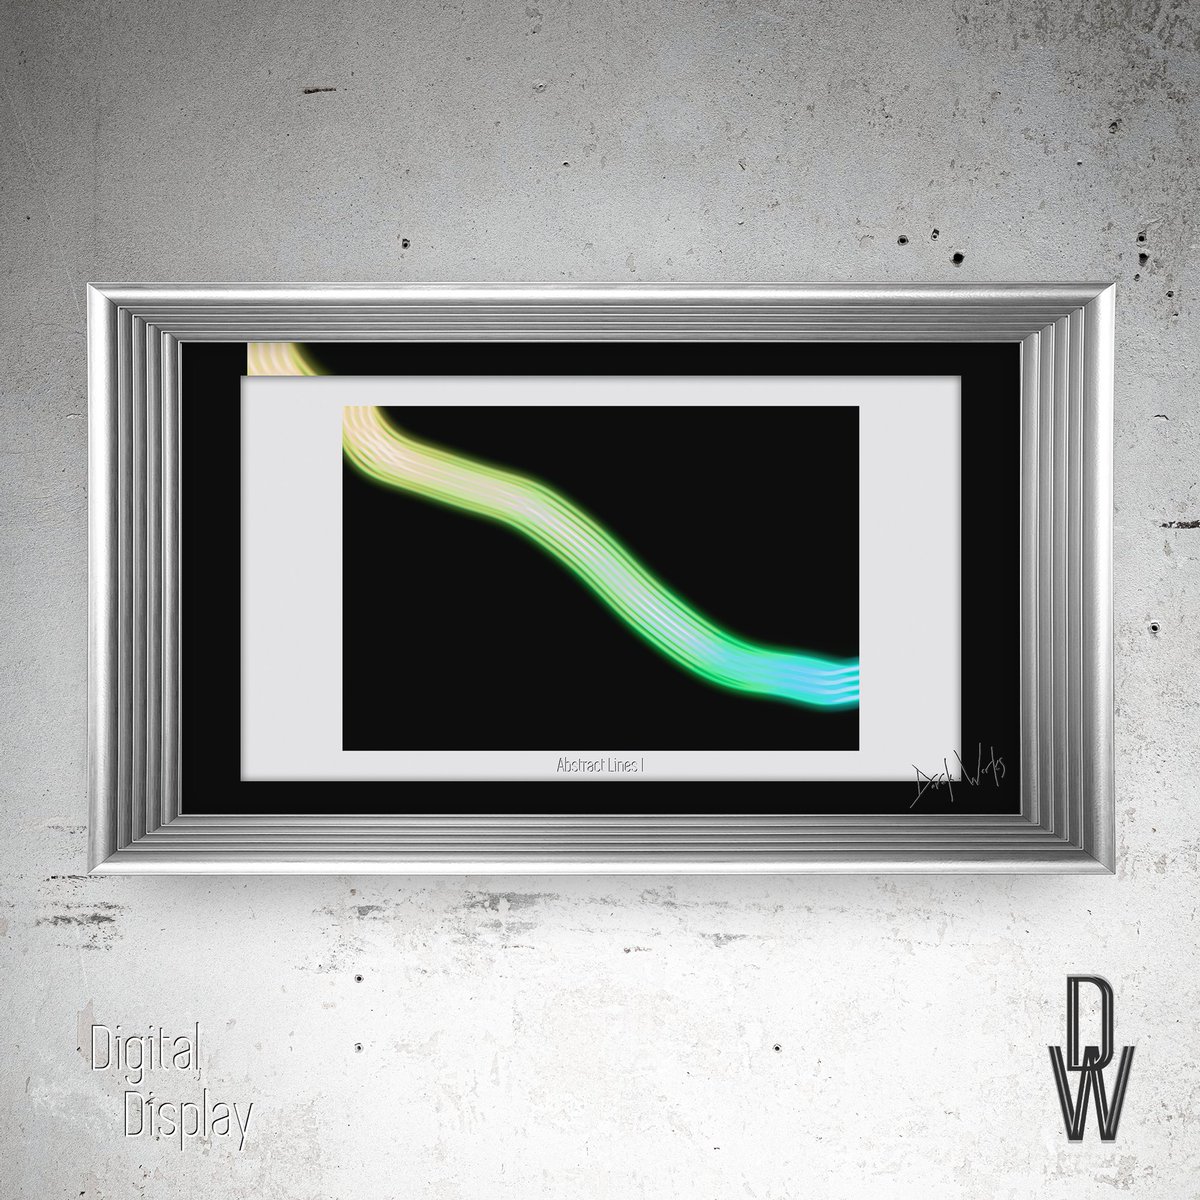 <<< Abstract Lines Series >>>
•Artwork: Abstract Lines I
•Medium: Photograph
🖤🌿
#art #artprint #homedecoration #interiordesign #photoprint #decoration #abstractlovers #photography